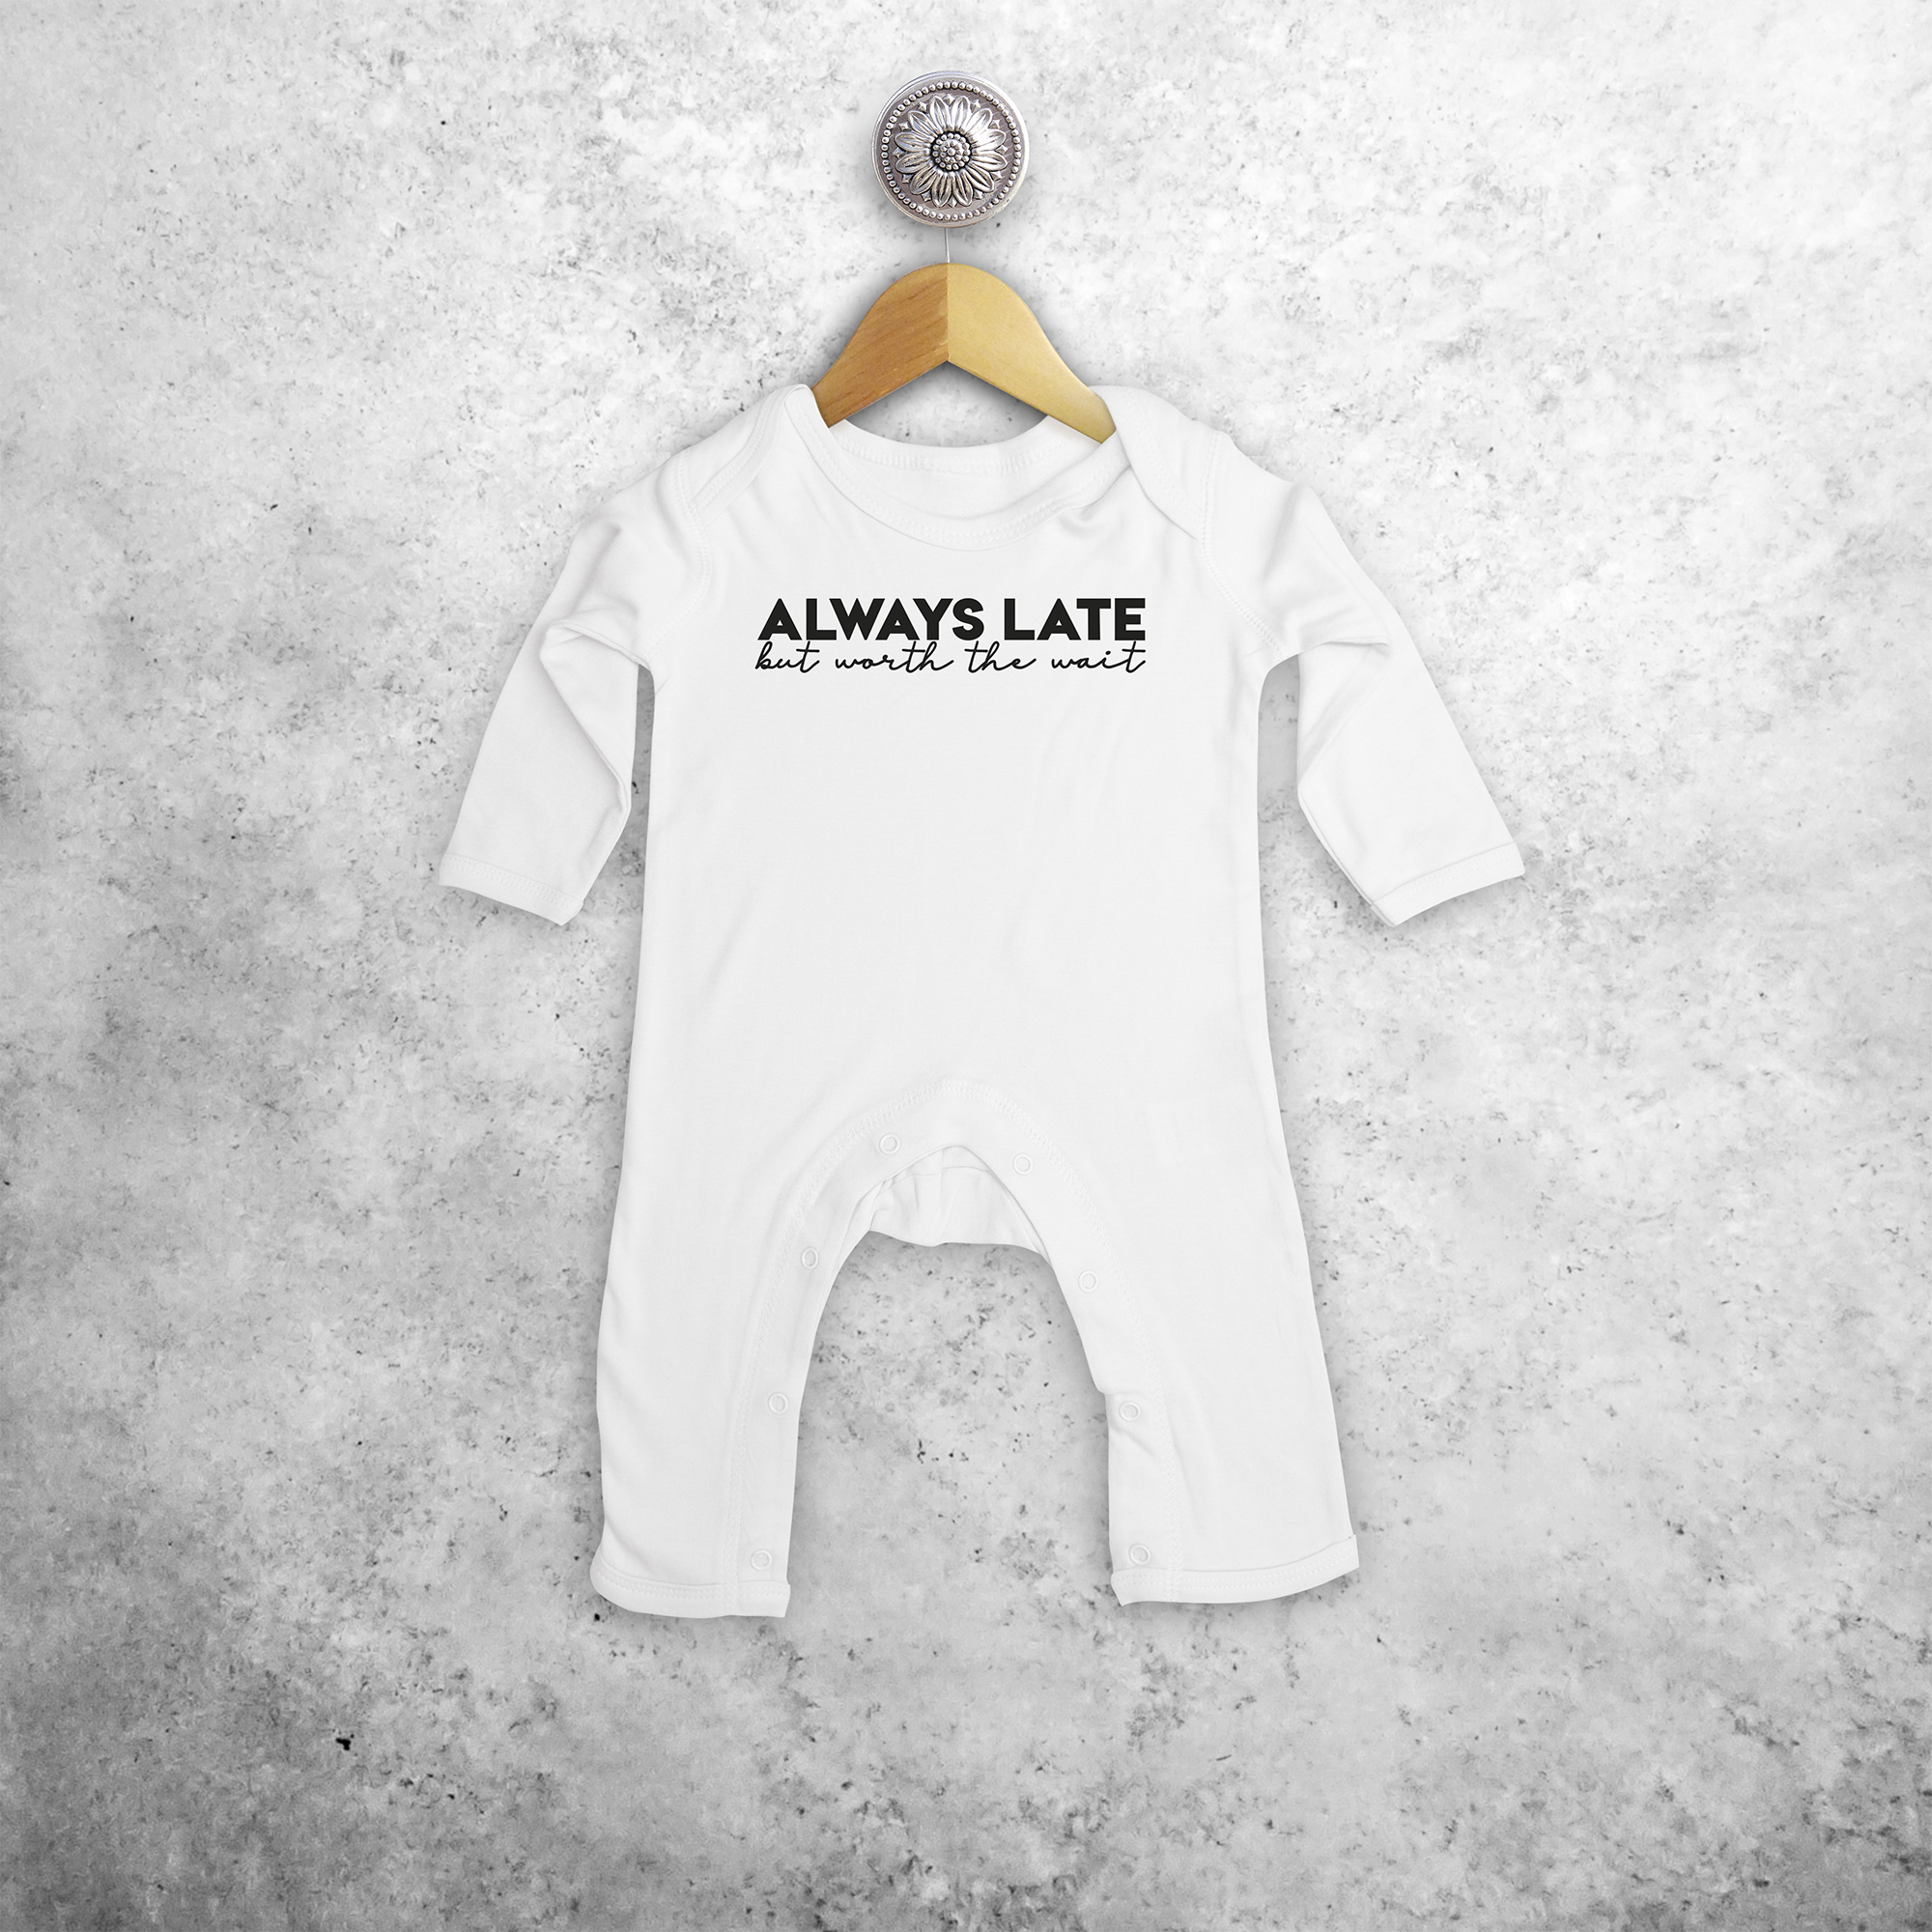 'Always late, but worth the wait' baby romper